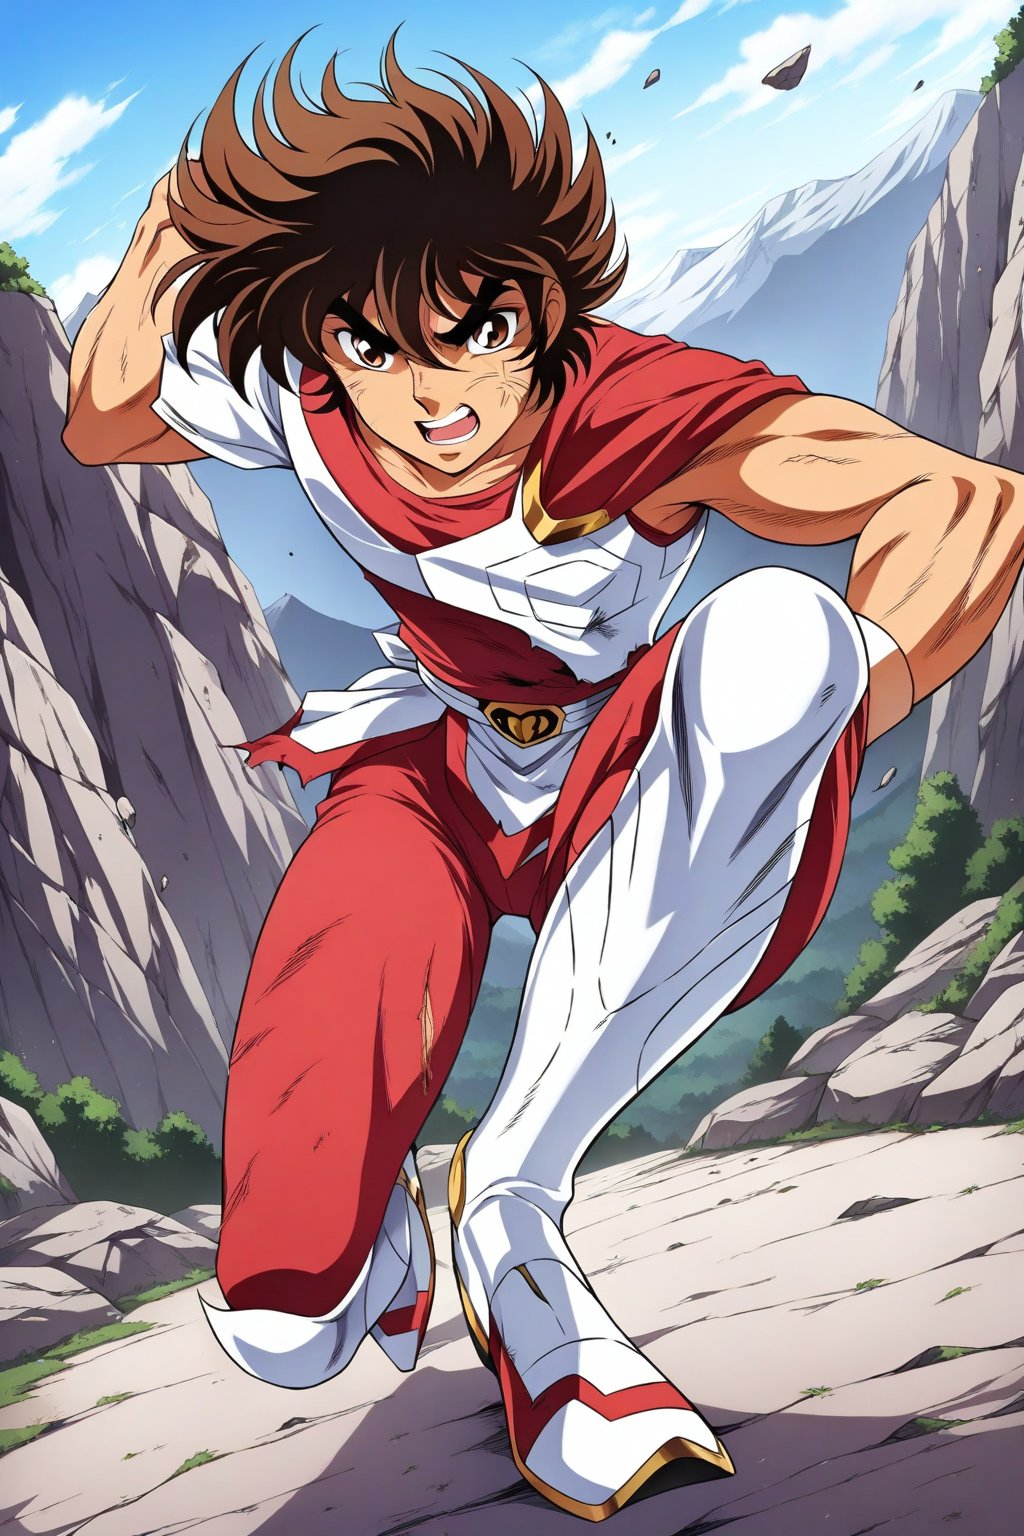 (masterpiece, best quality, ultra HD anime quality, super high resolution, 1980s/(style), retro, anatomically accurate, perfect anatomy), (front, bottom angle), looking at the camera, (Seiya Pegasus, male, (Pegasus cloth, slightly damaged)), 1 male, solo, brown hair, short hair, bangs between eyes, messy hair, brown eyes, angry face, scratch on cheek), heavy breathing, excited, (red underwear, tattered, red underwear pants, tattered), (fighting stance, ready, low stance, legs wide apart, one foot forward), (mountain scenery, mountain path, barren land, big rocks, cliff), score_9, score_8_up, score_7_up, score_6_up